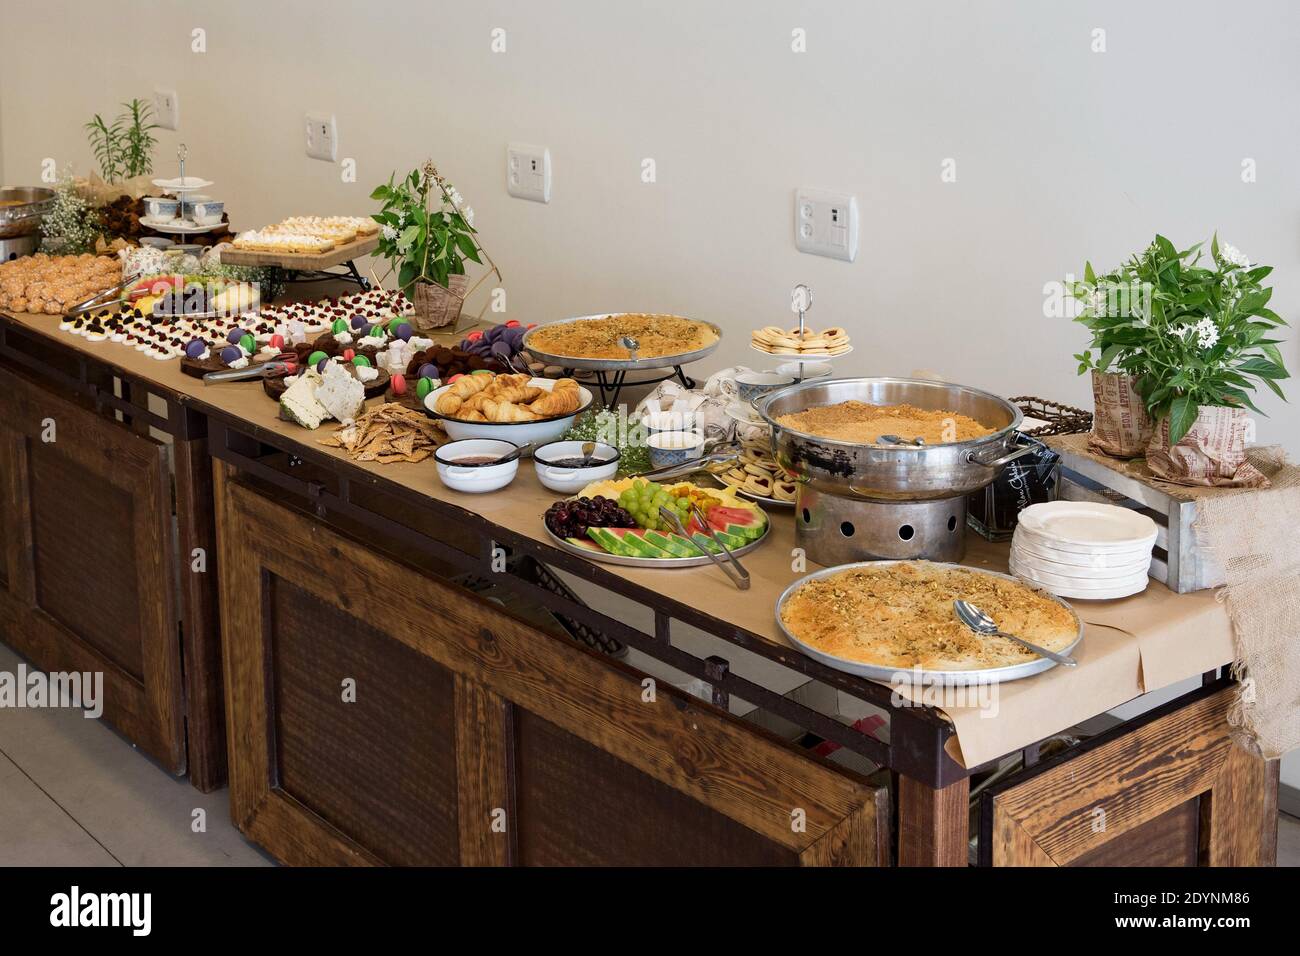 Assortment of desserts on a buffet table Stock Photo